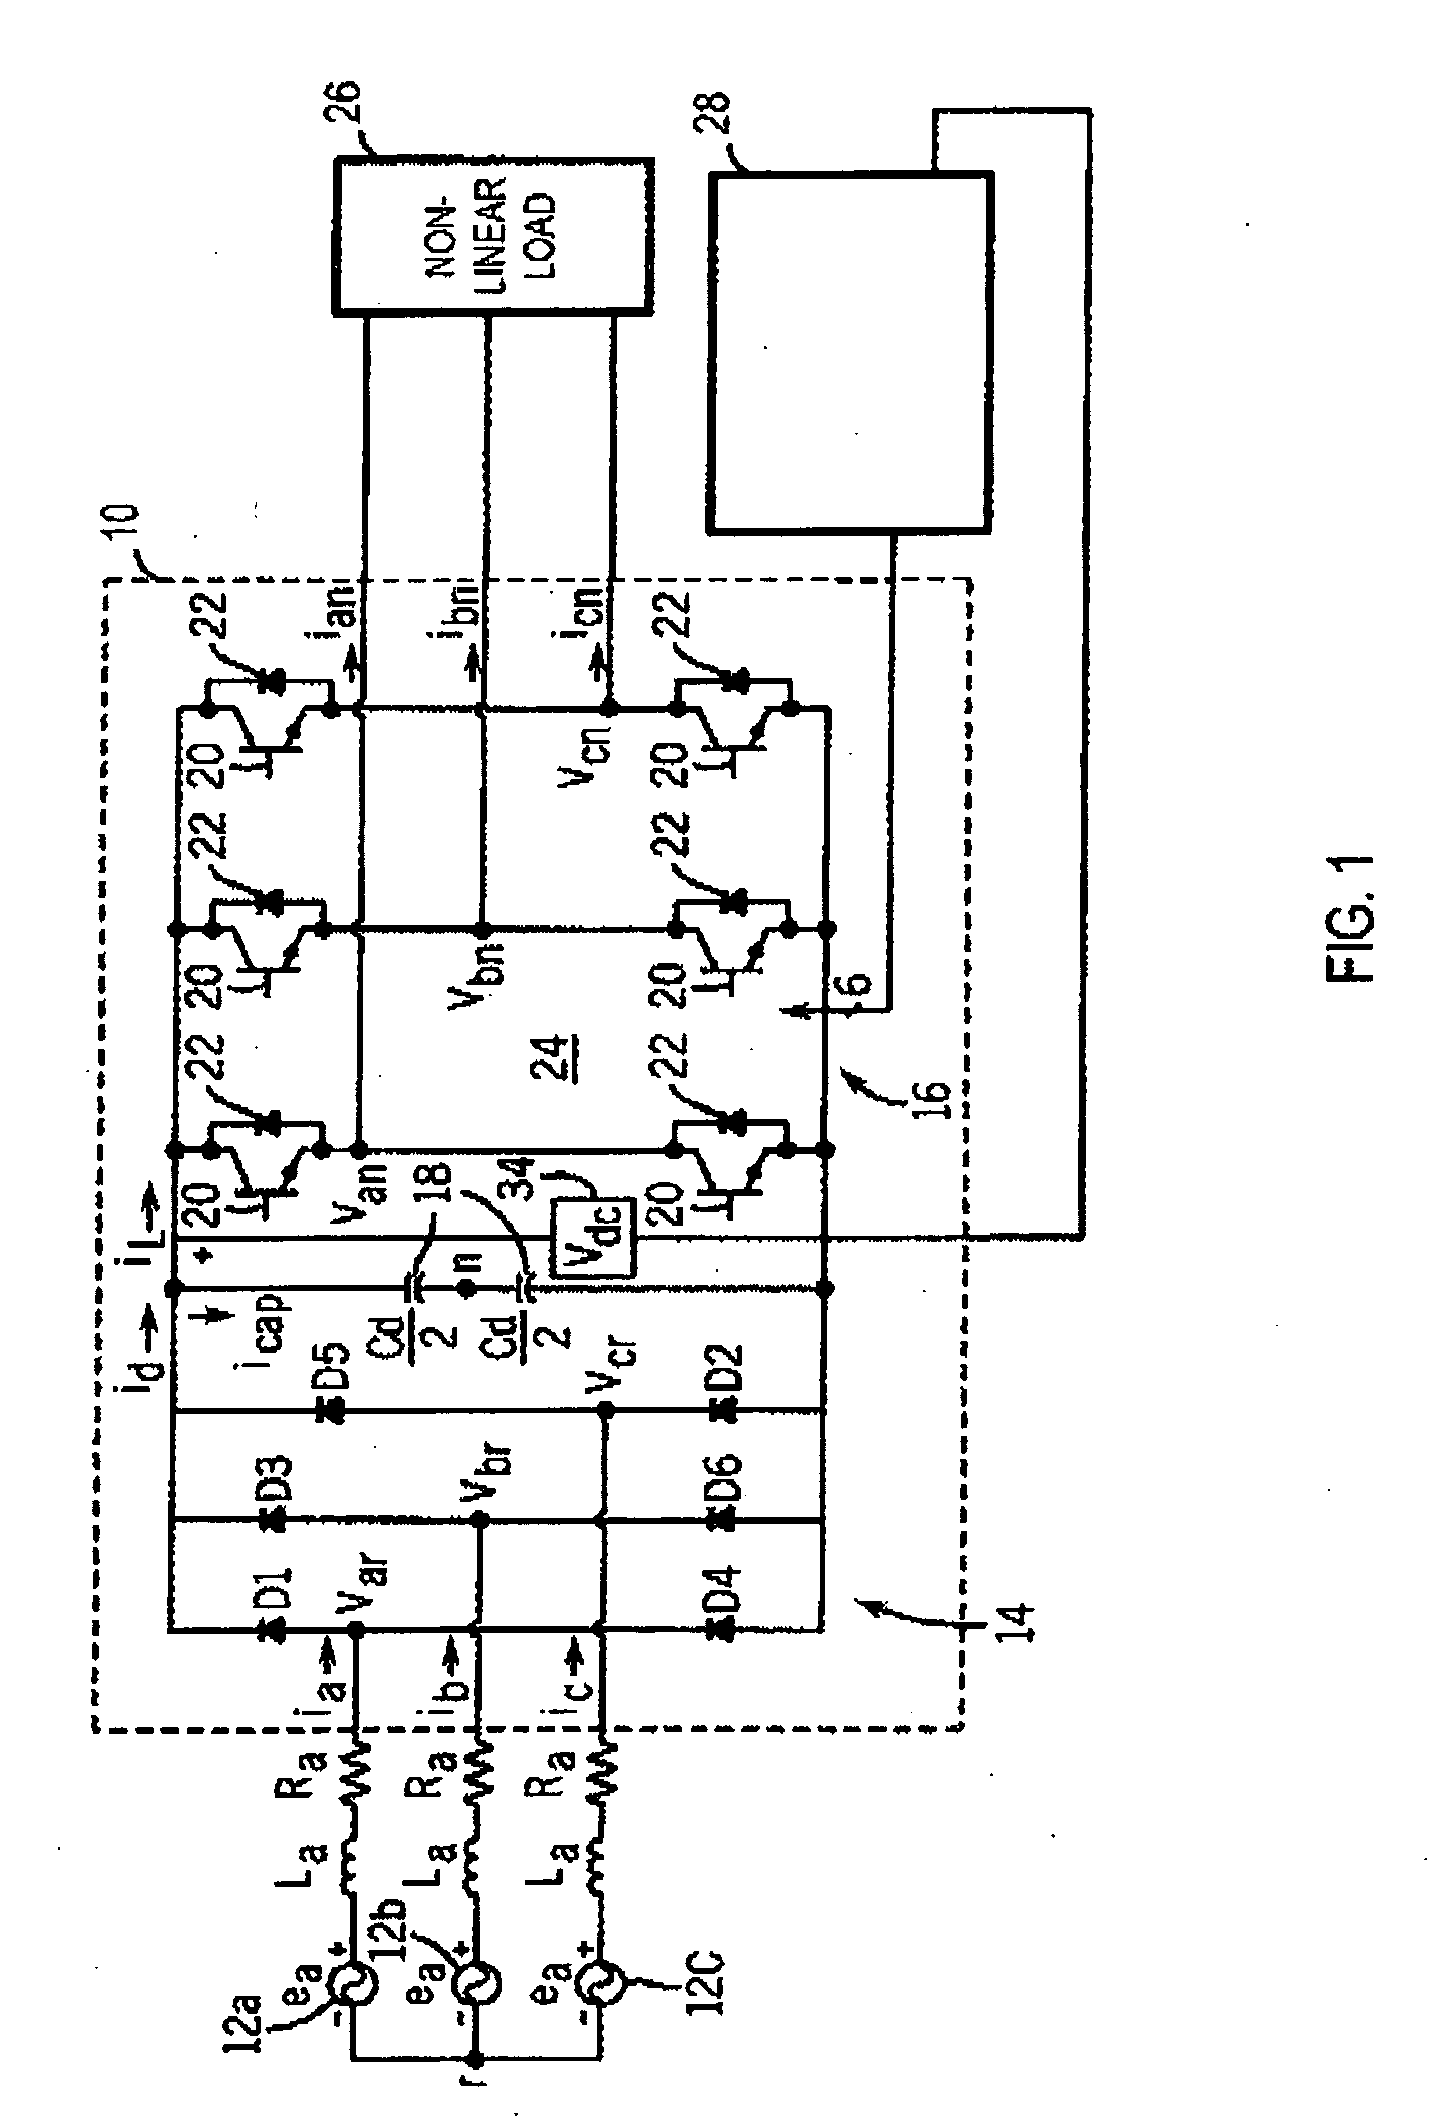 System and method for determining stator winding resistance in an ac motor using motor drives